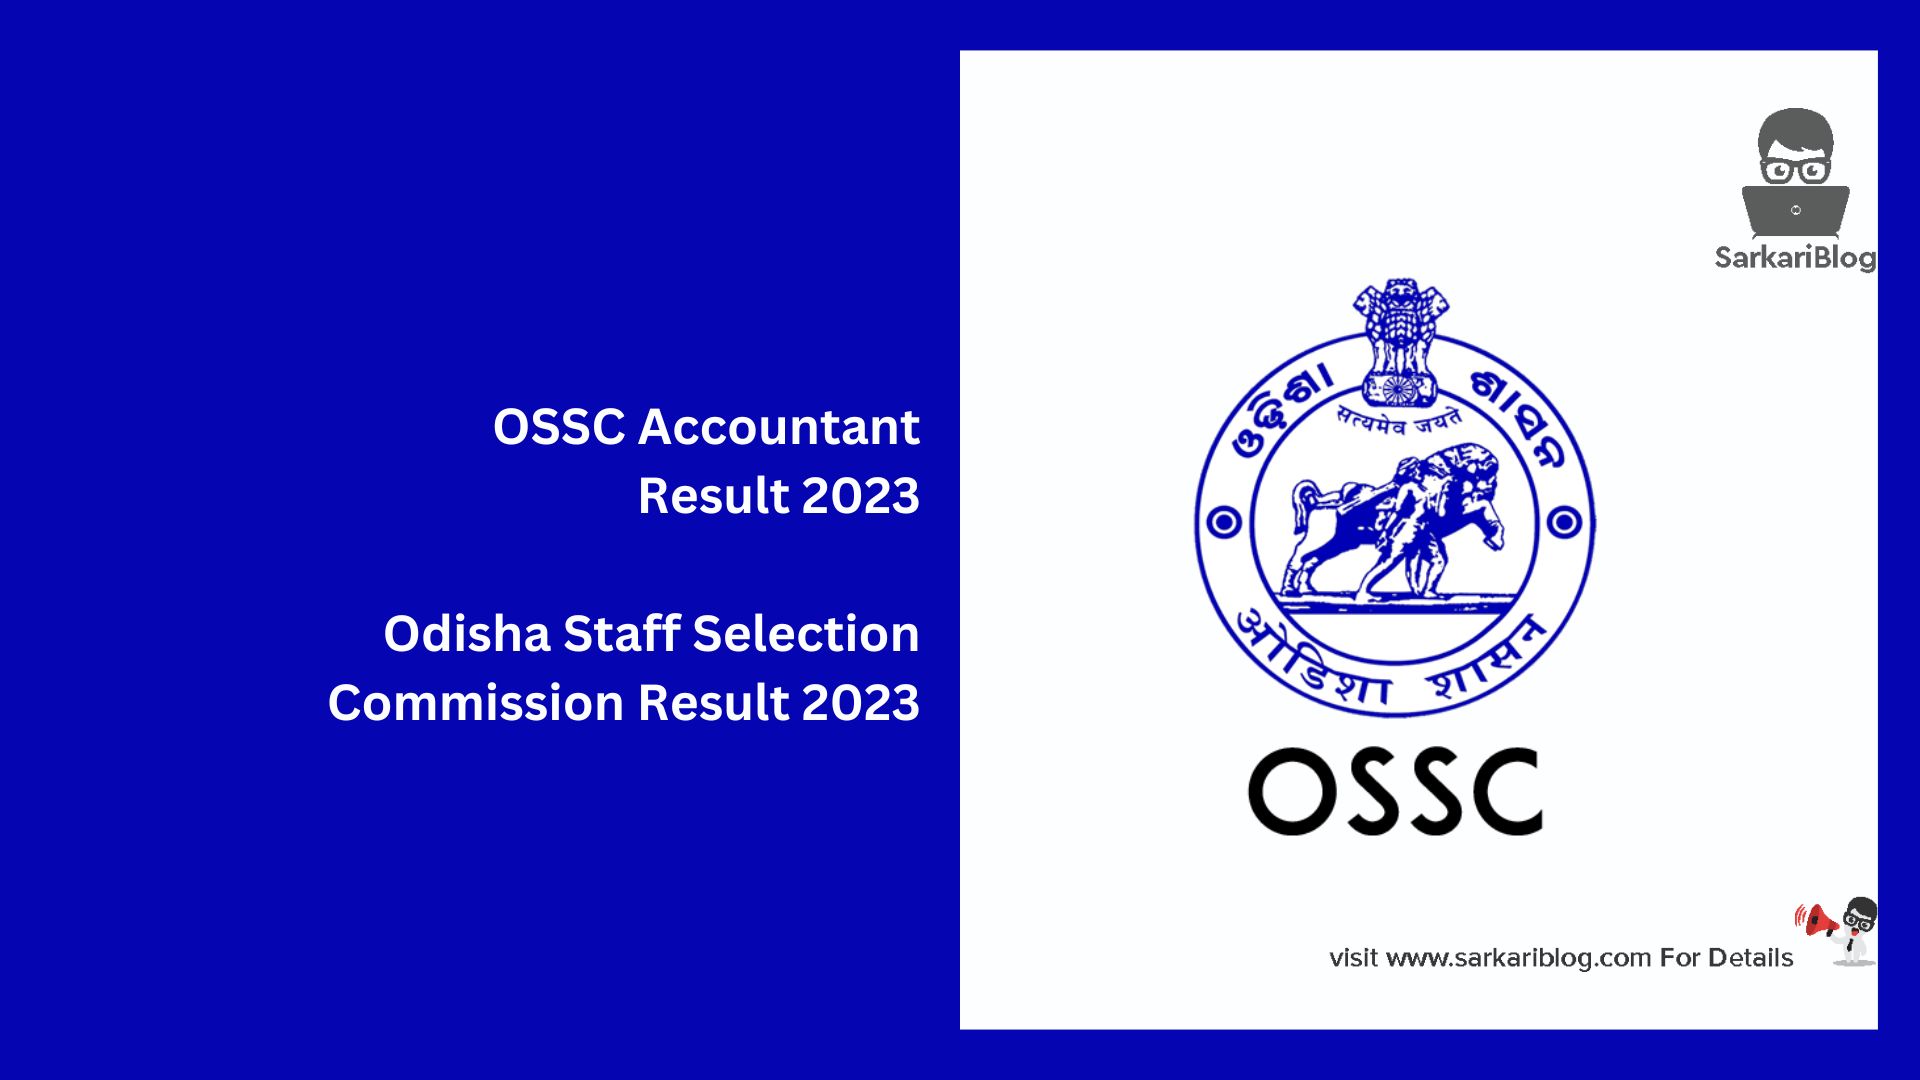 OSSC Accountant Result 2023